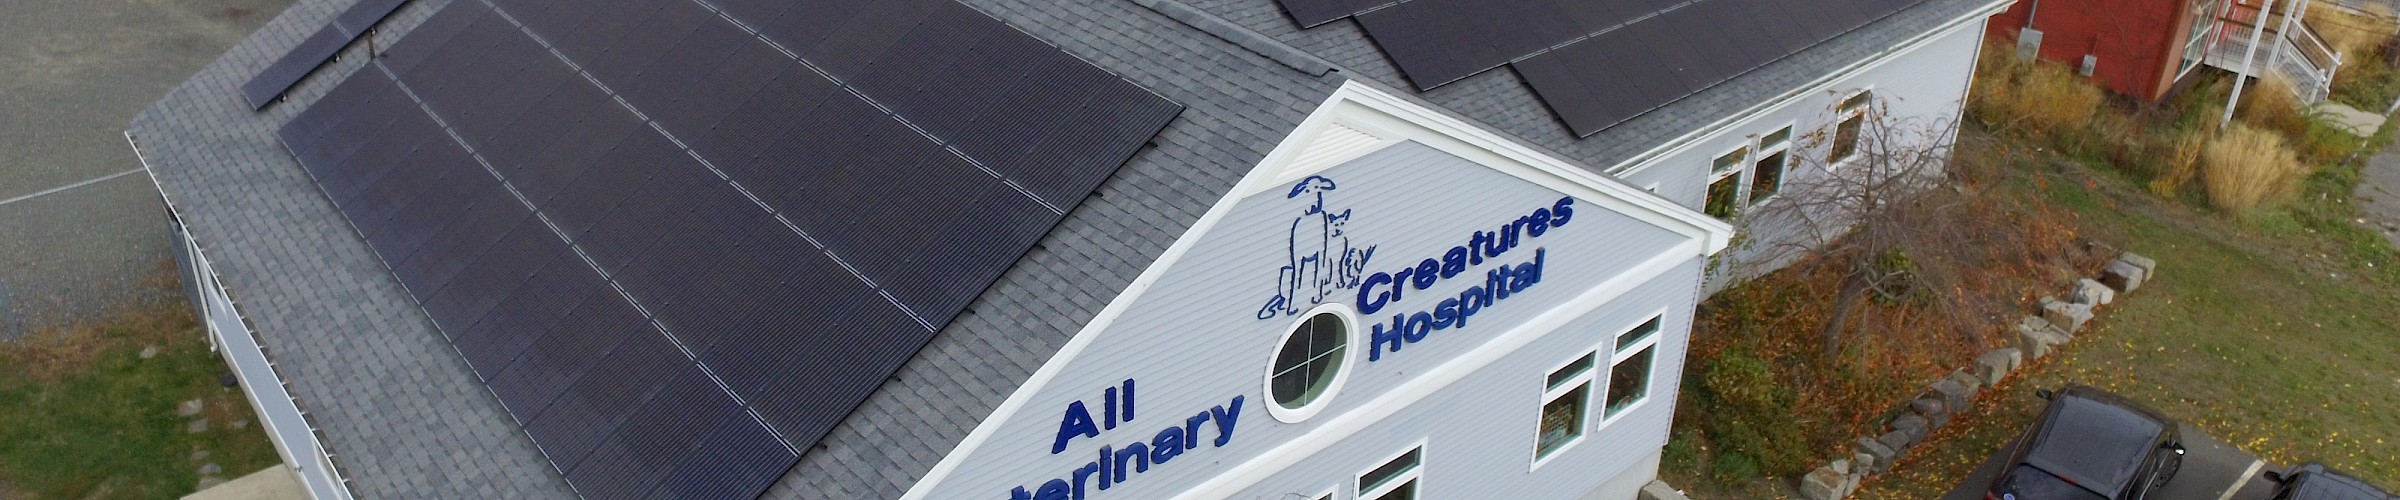 31.30 kW Commercial Solar Install on All Creatures Veterinary Hospital